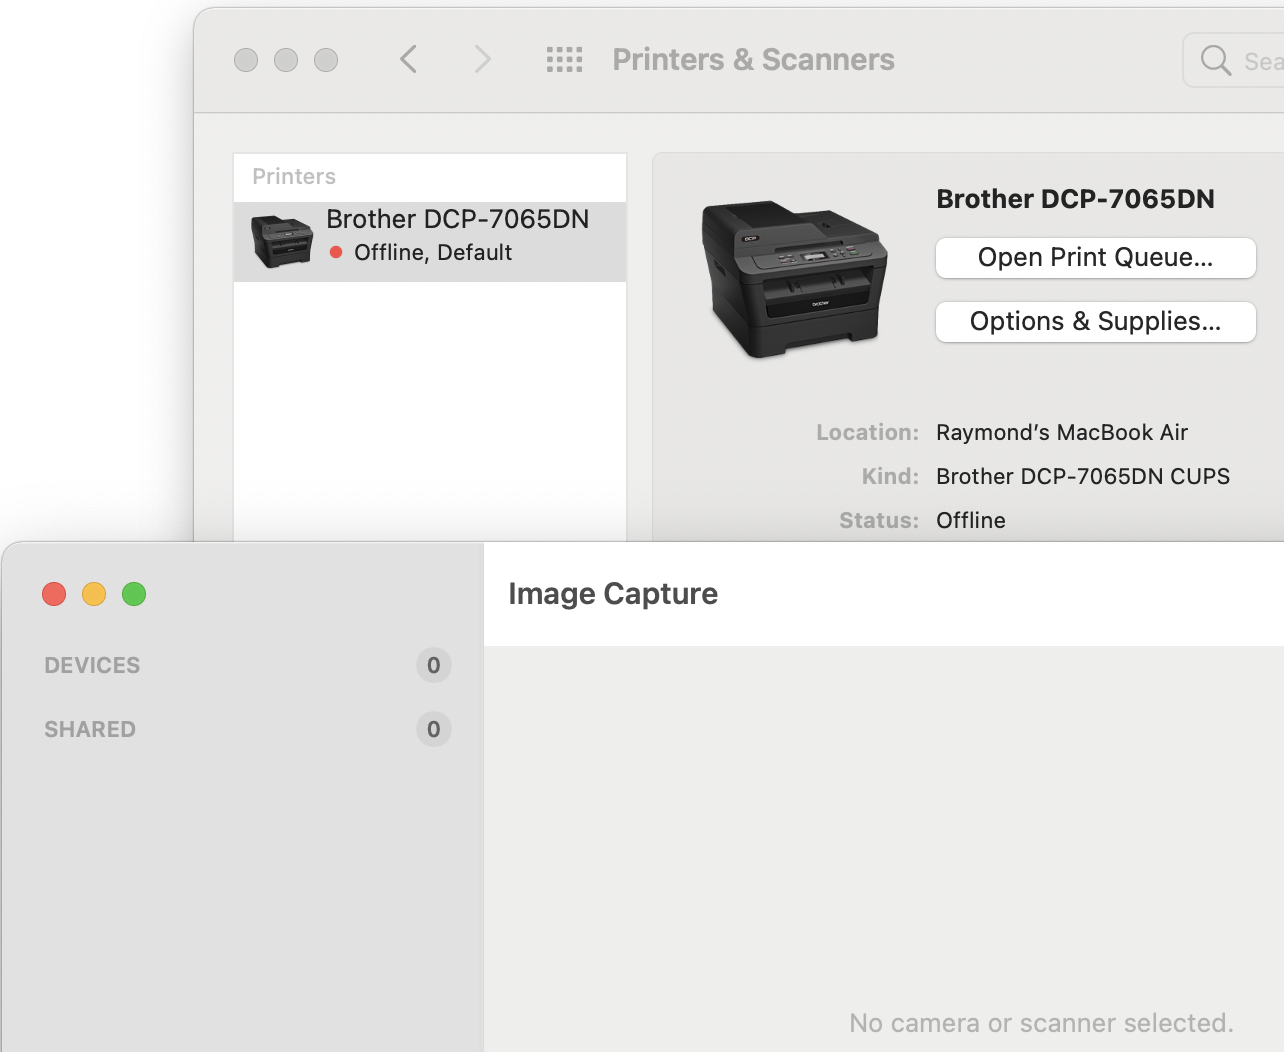 Any try brother printer/scanners yet? | MacRumors Forums